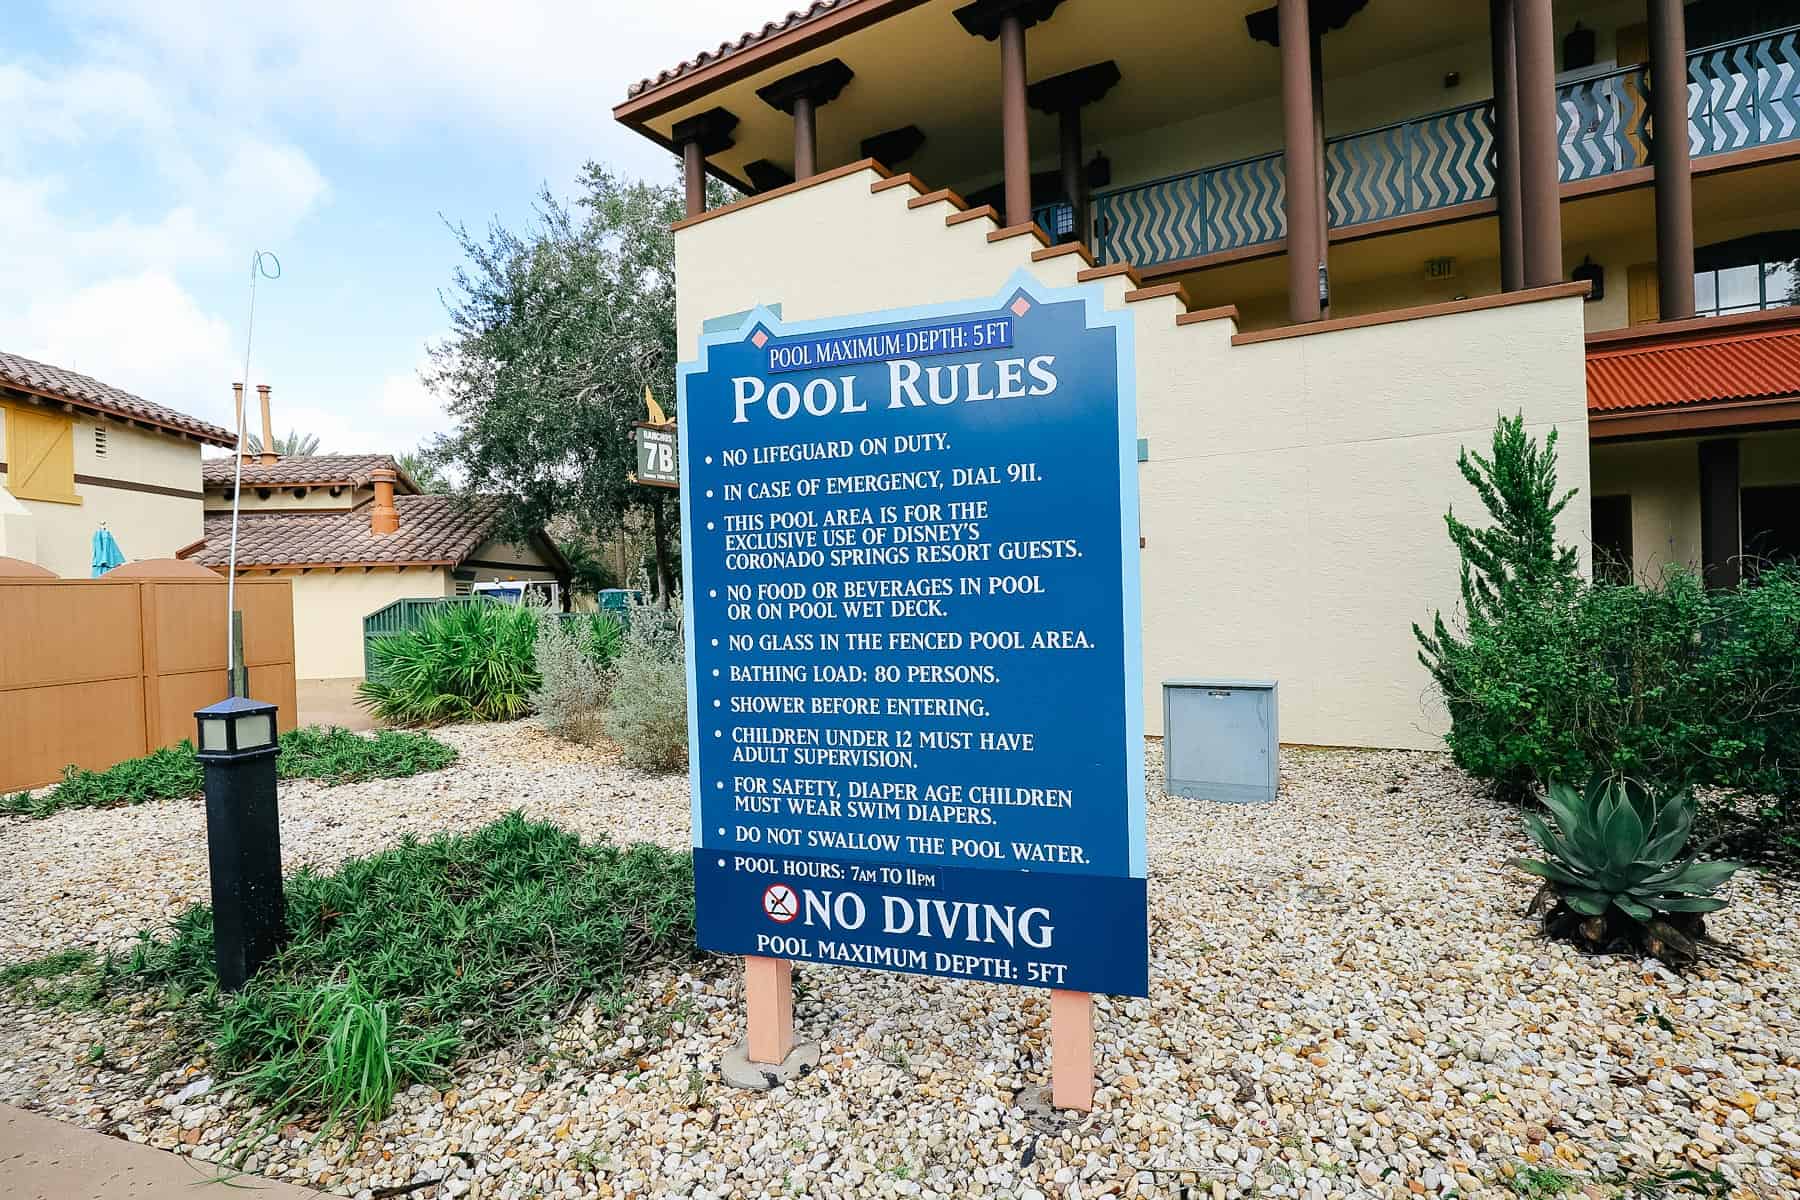 Posted Pool Rules at one of the quiet pools. 